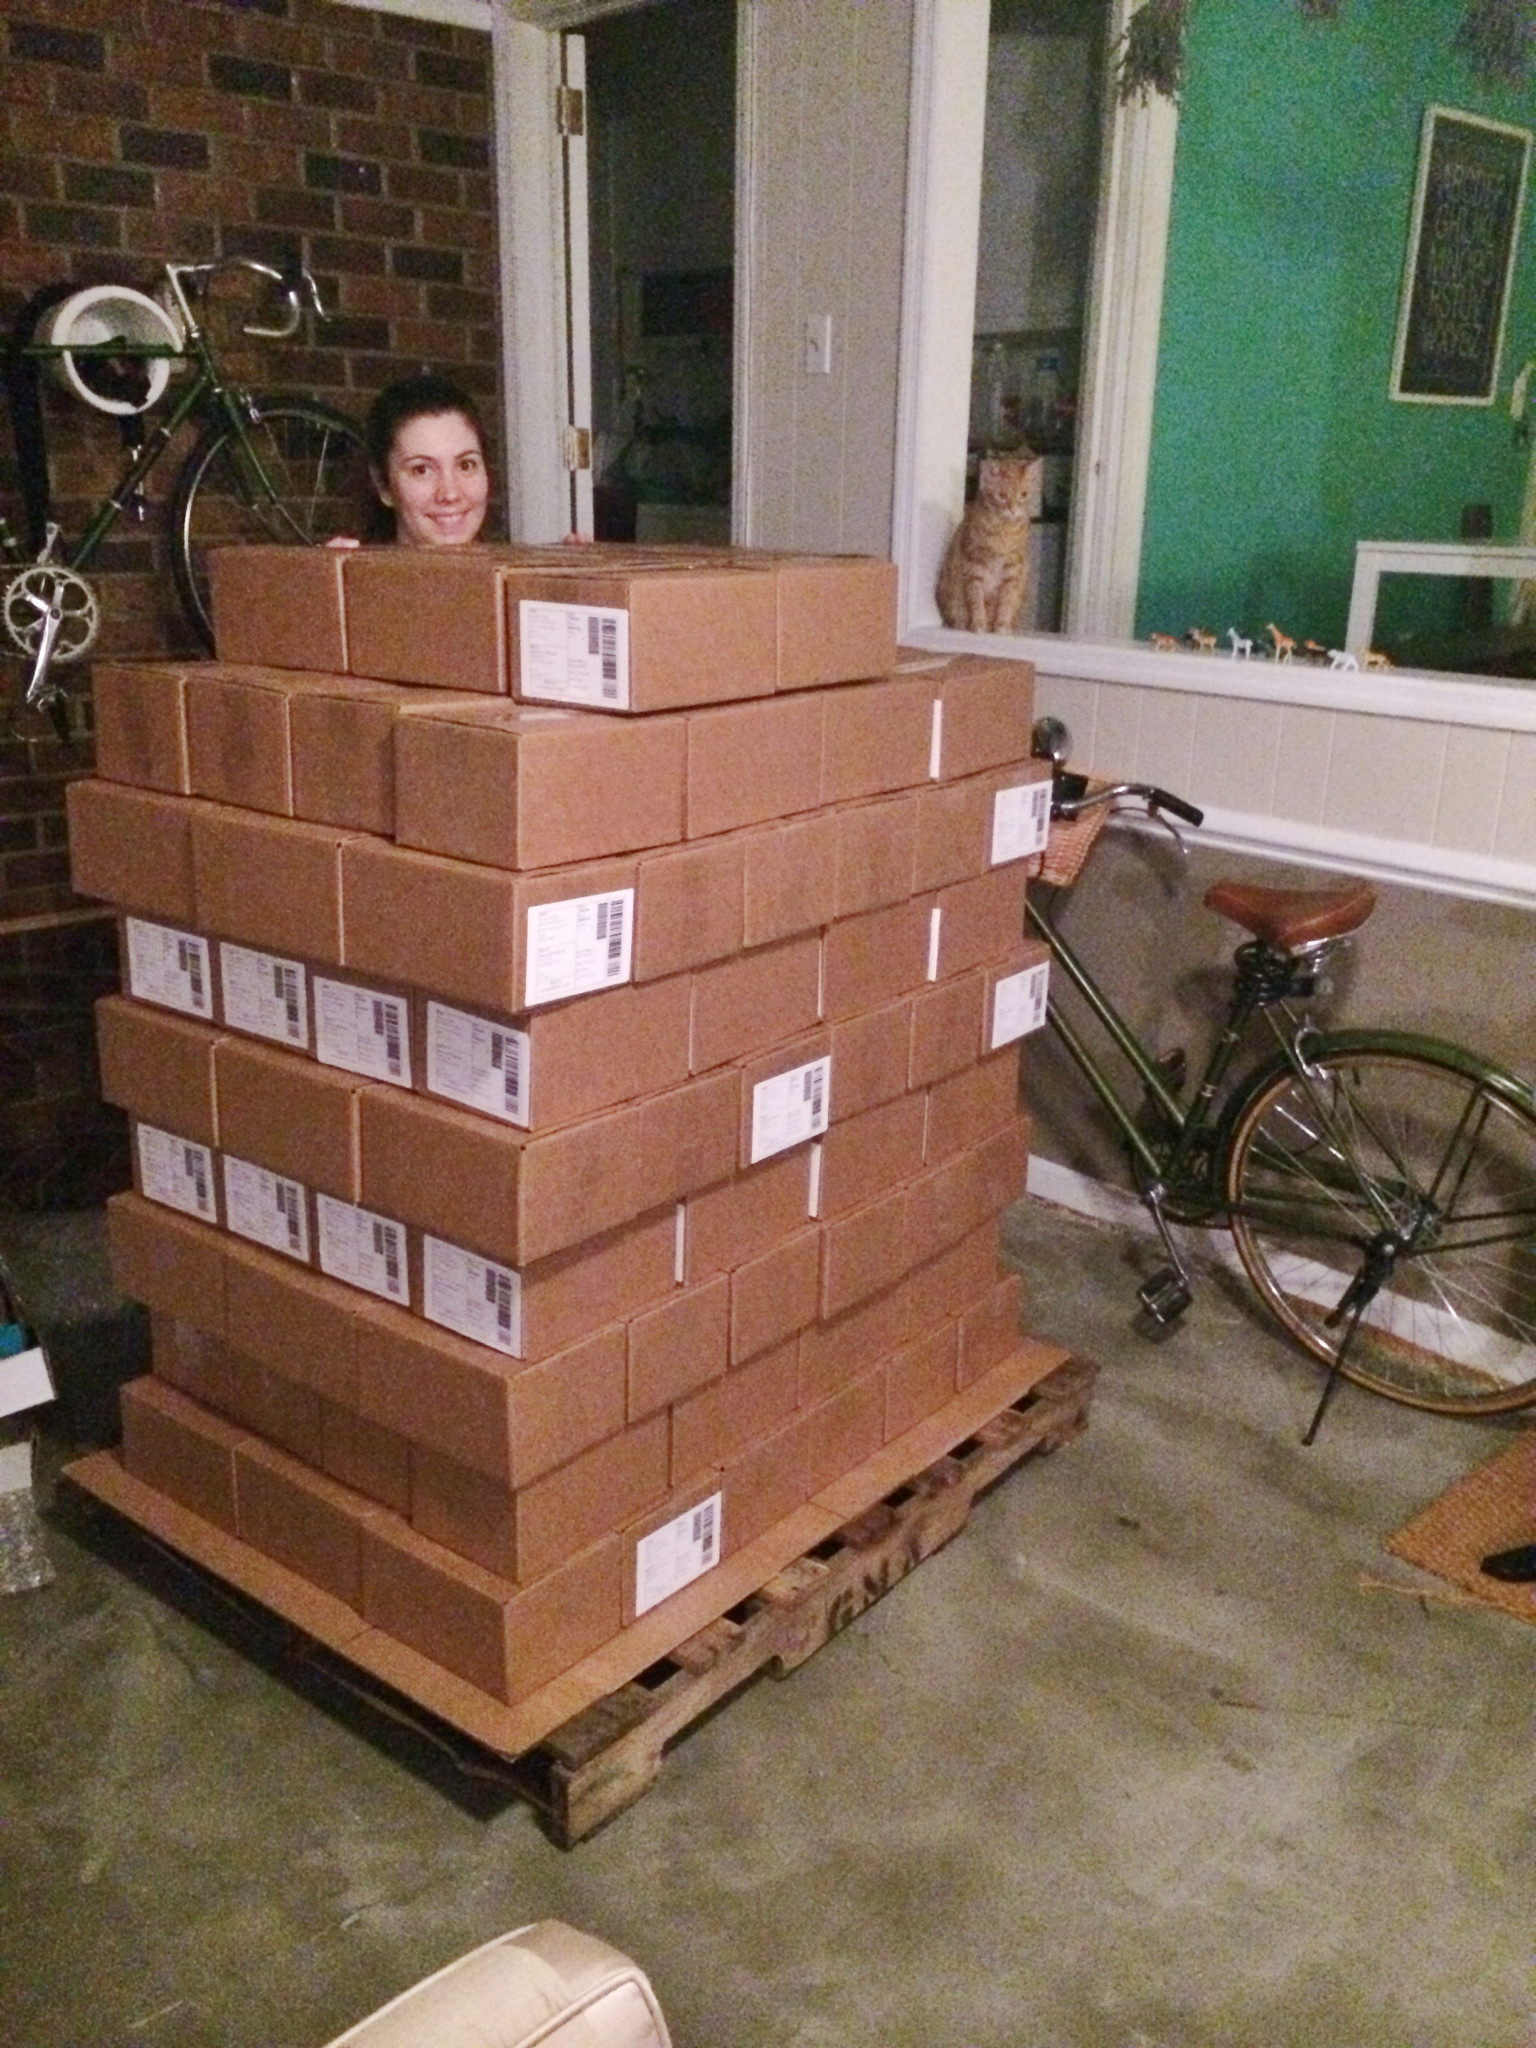 In the living room Allison stands behind a pallet stacked high with shipping boxes for a wholesale order